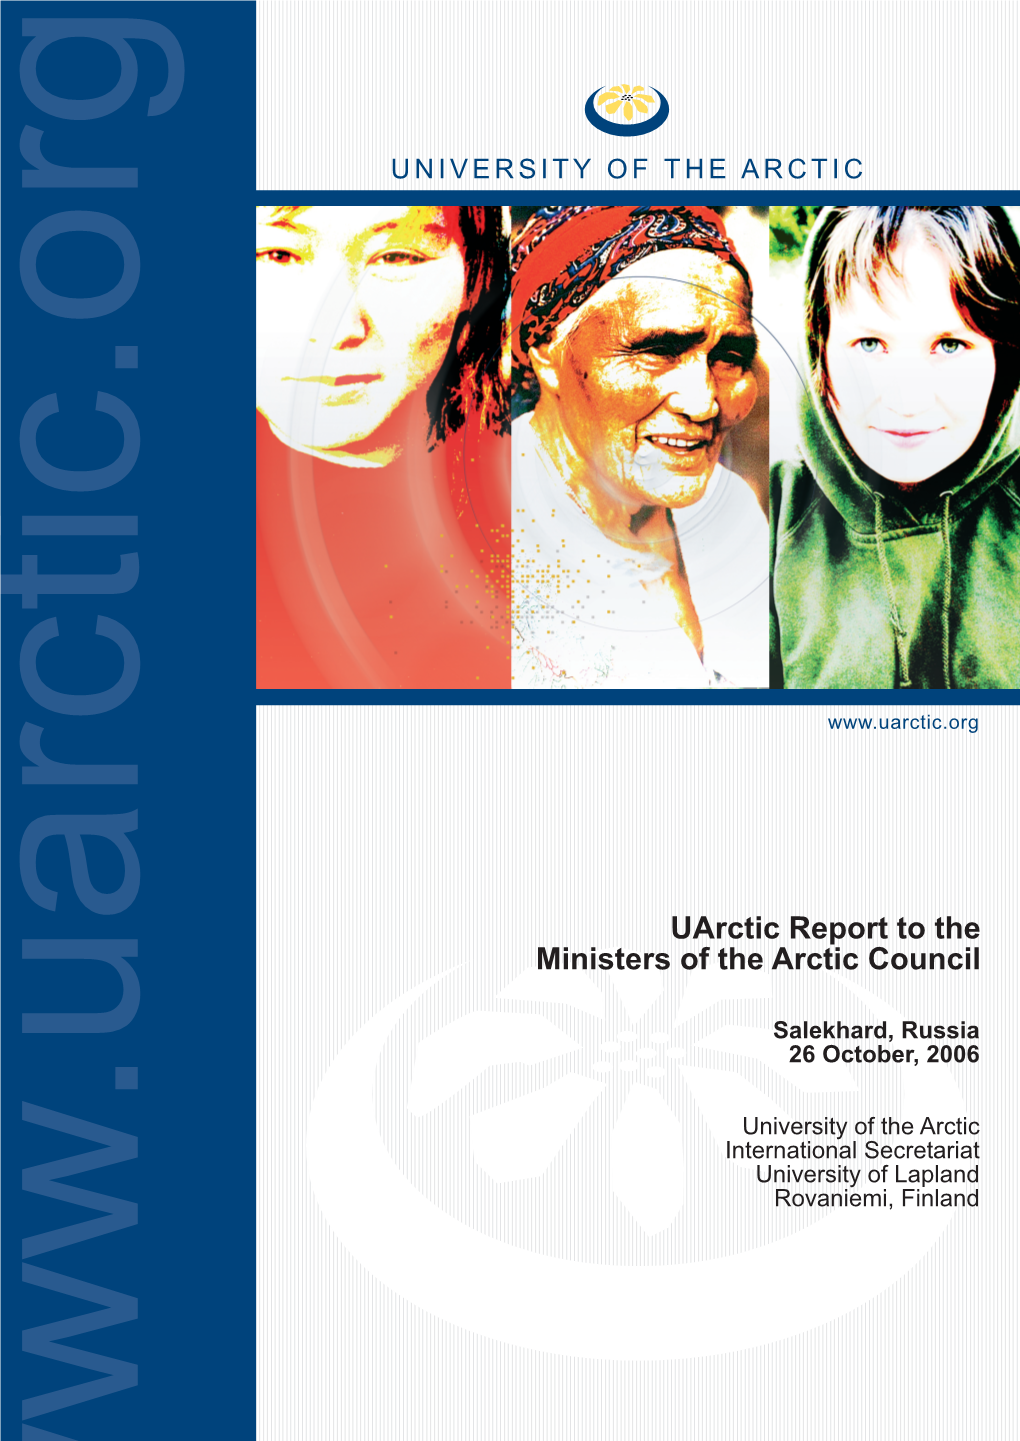 University of the Arctic – Five Successful Years